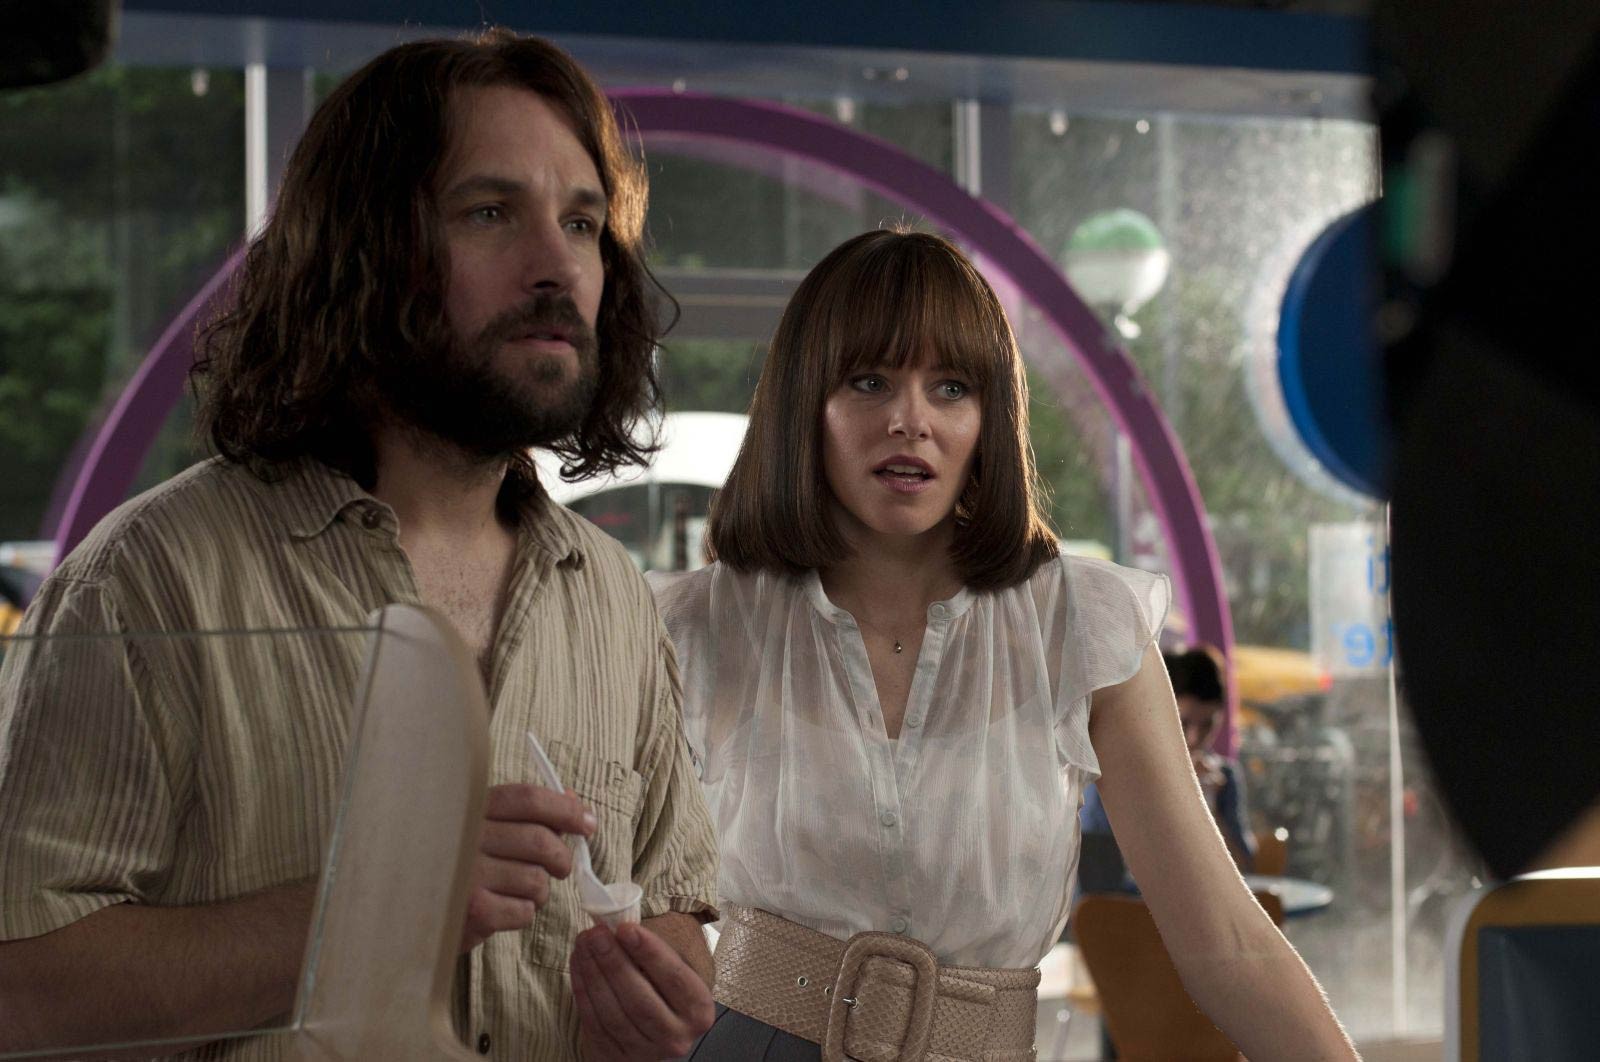 Paul Rudd and Elizabeth Banks are Ned and Miranda in Our - Idiot Brother.